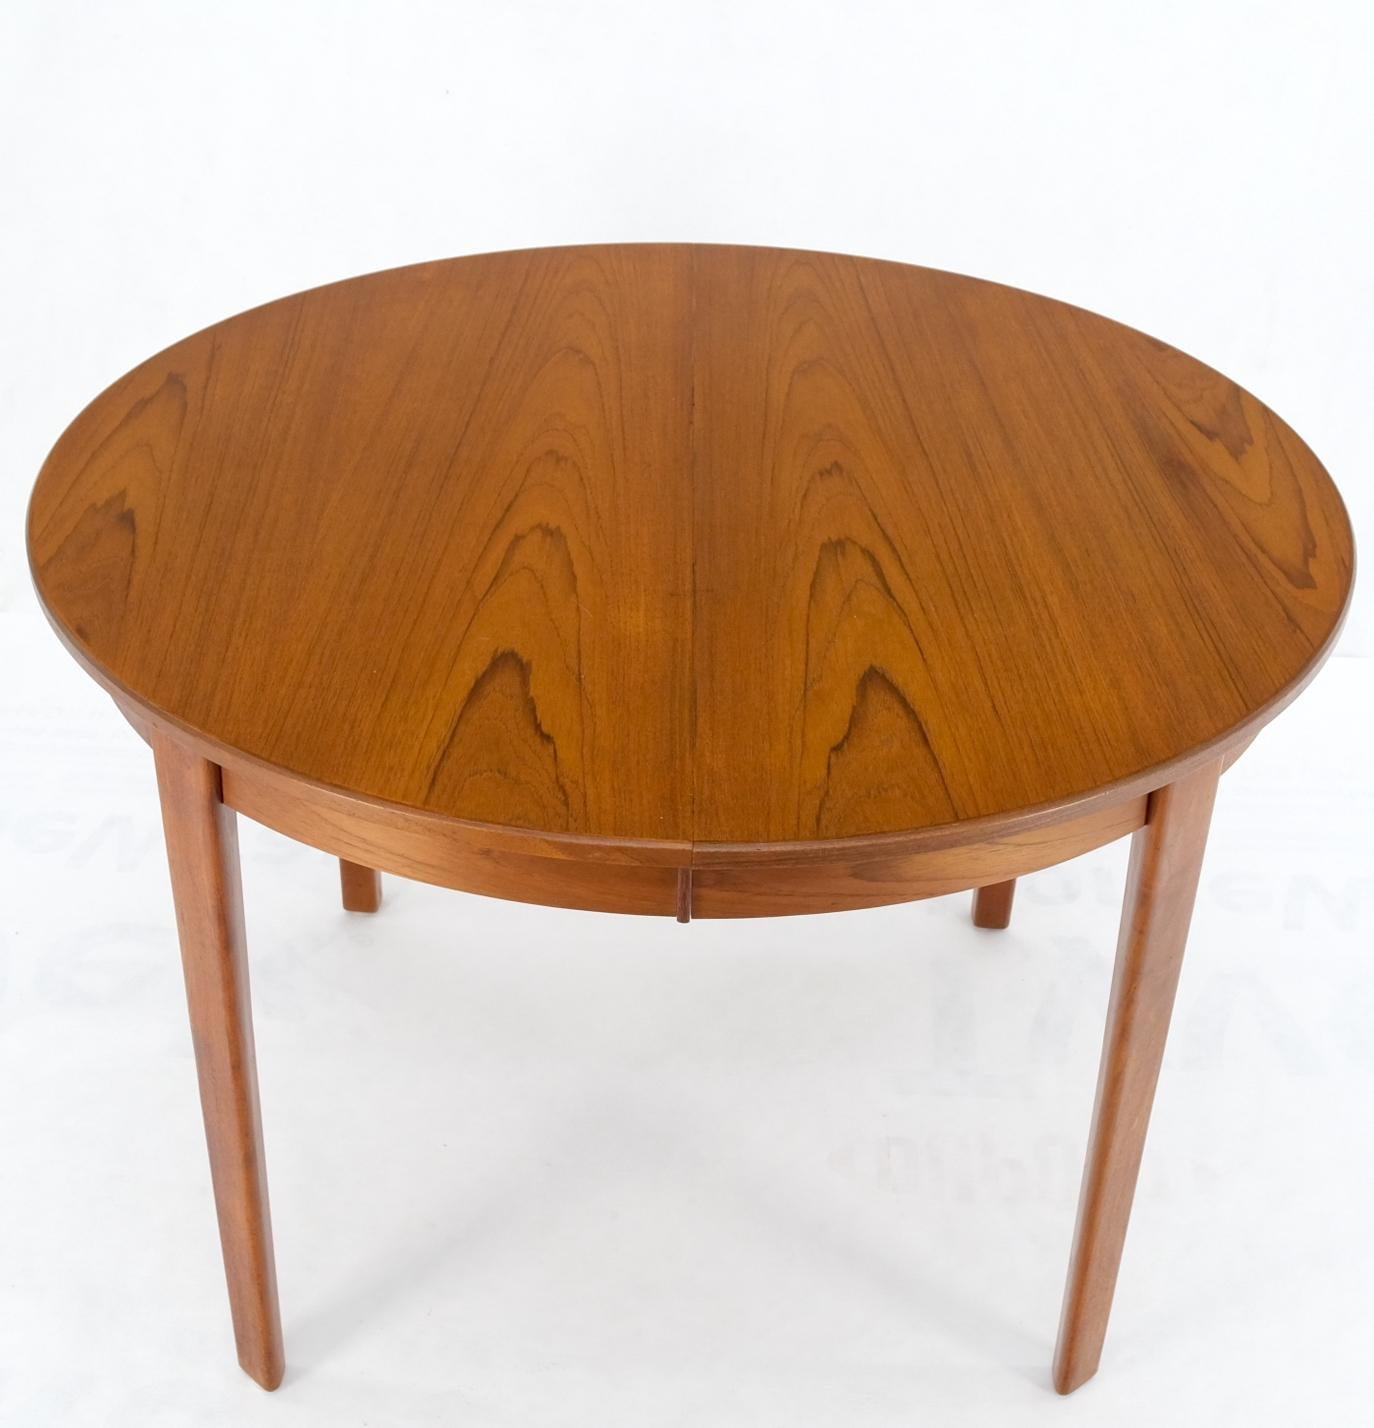 Danish Teak Mid Century Modern Round Dining Banquet Conference Table 4 Leaf MINT For Sale 10